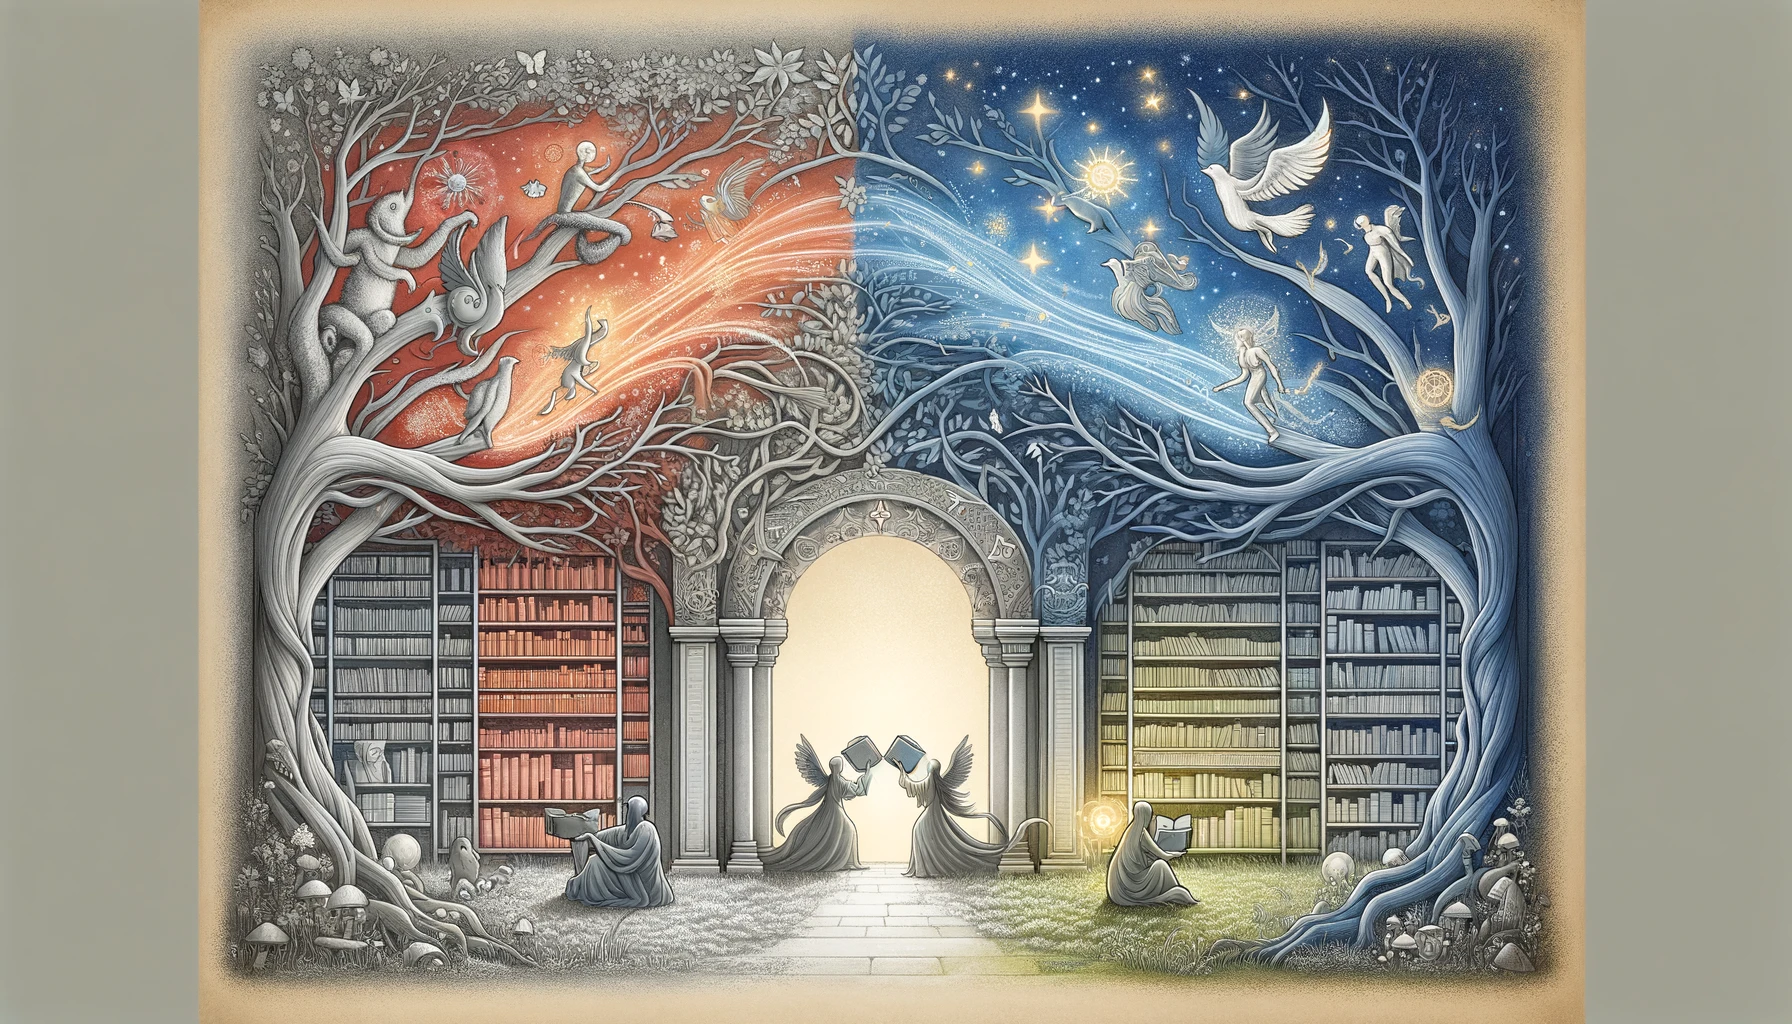 An ancient library transitions into an enchanted forest, where mystical creatures and philosophers exchange ideas, under a canopy of intertwined branches and glowing manuscripts, illustrating the harmonious integration of folklore and philosophy, depicted in light gray, dark gray, bright red, yellow, and blue.